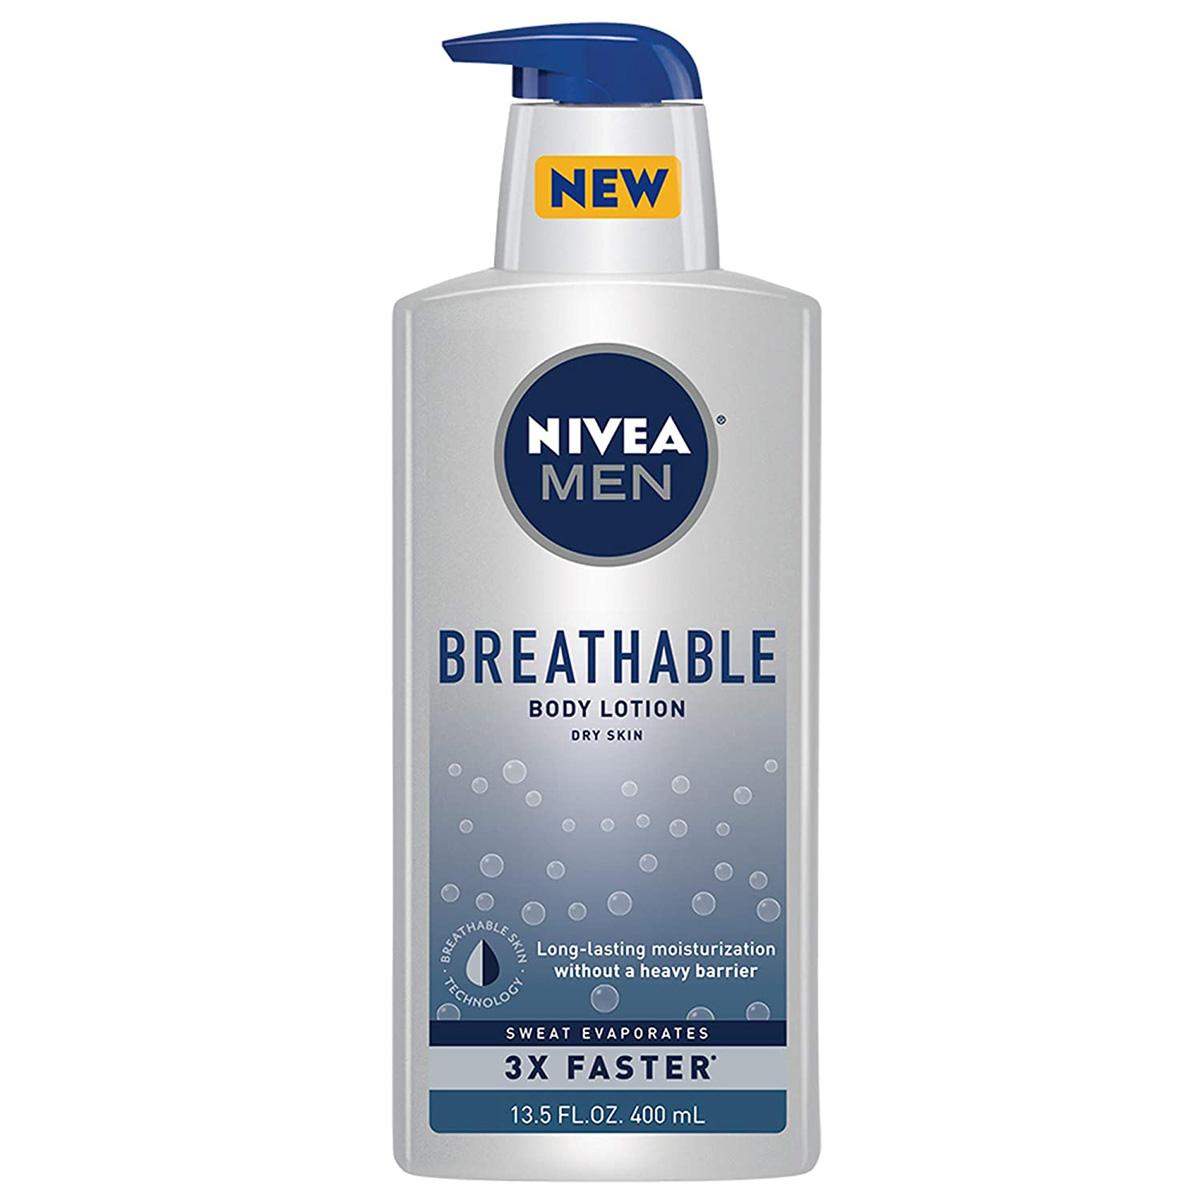 Amazon 3 Select Nivea or Gillete Products $5 Off